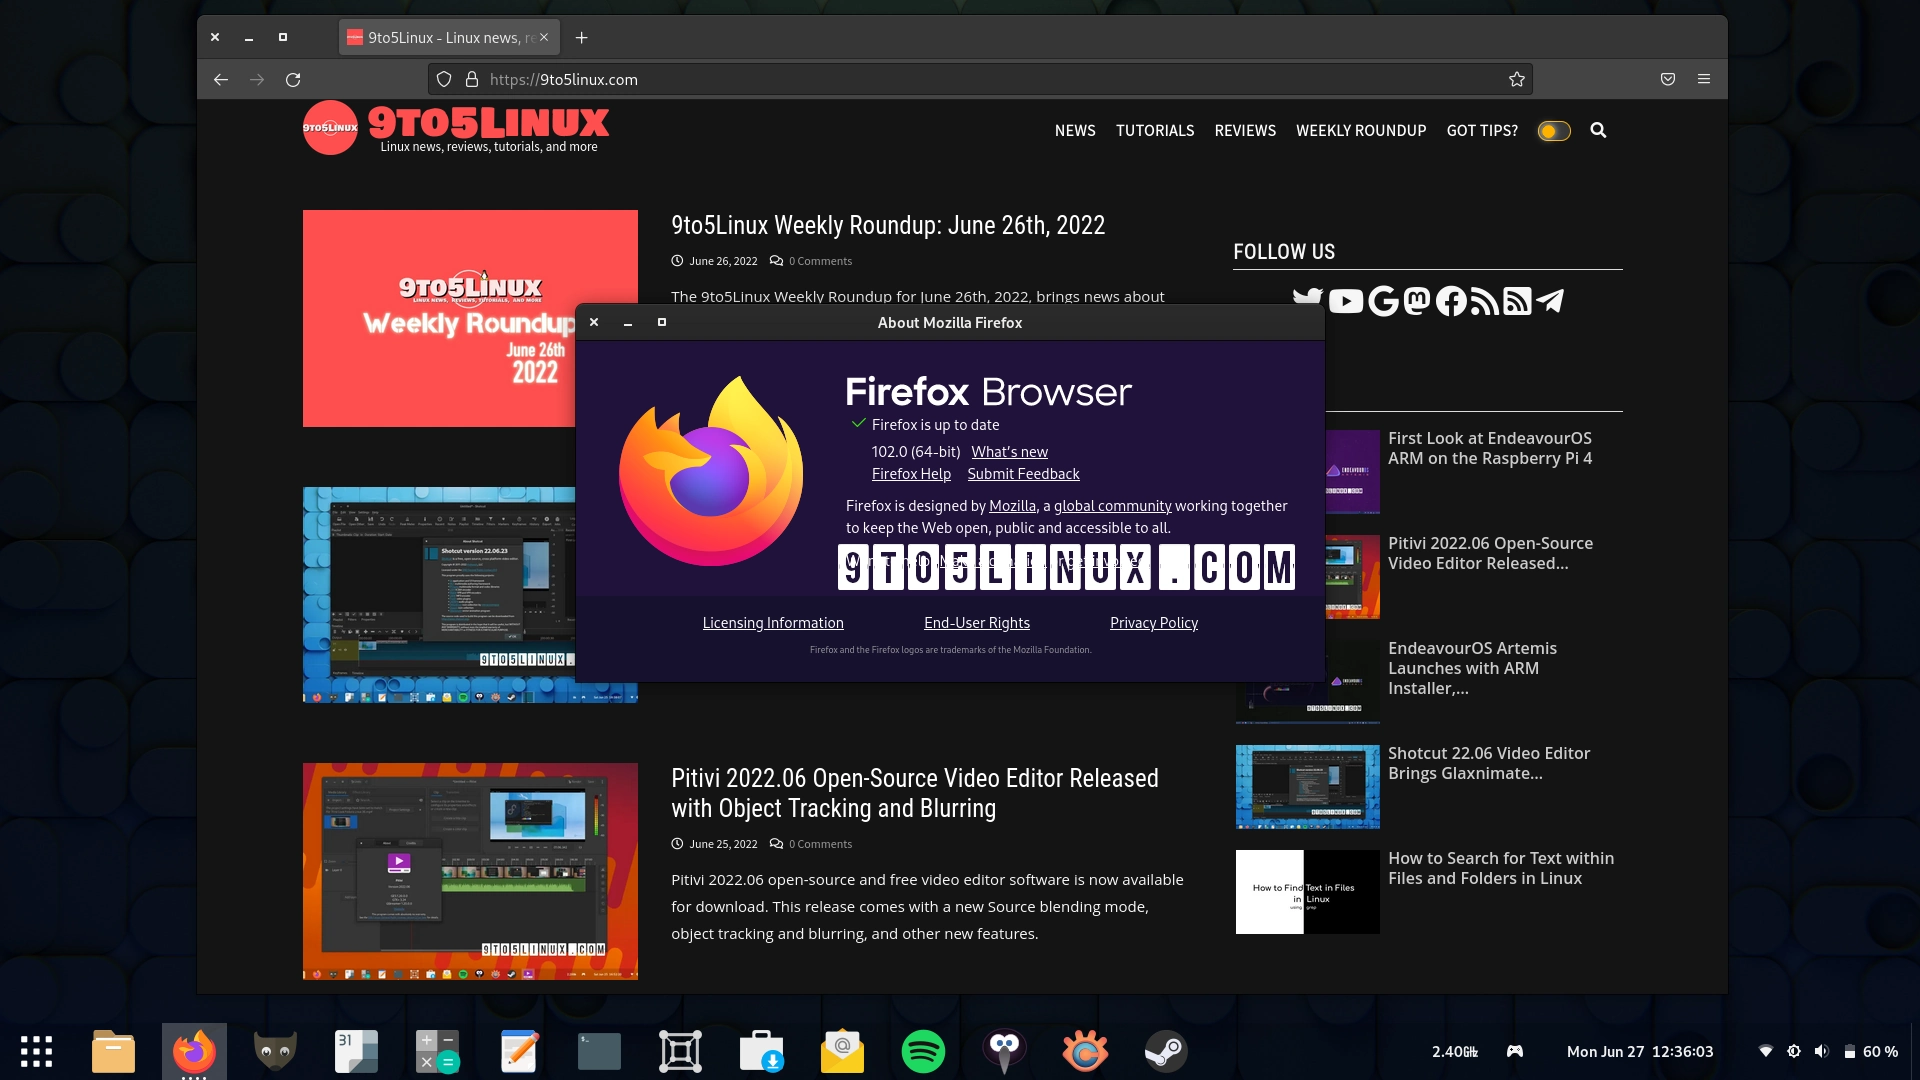 Mozilla Firefox 102 Is Now Available for Download, Adds Geoclue Support on Linux